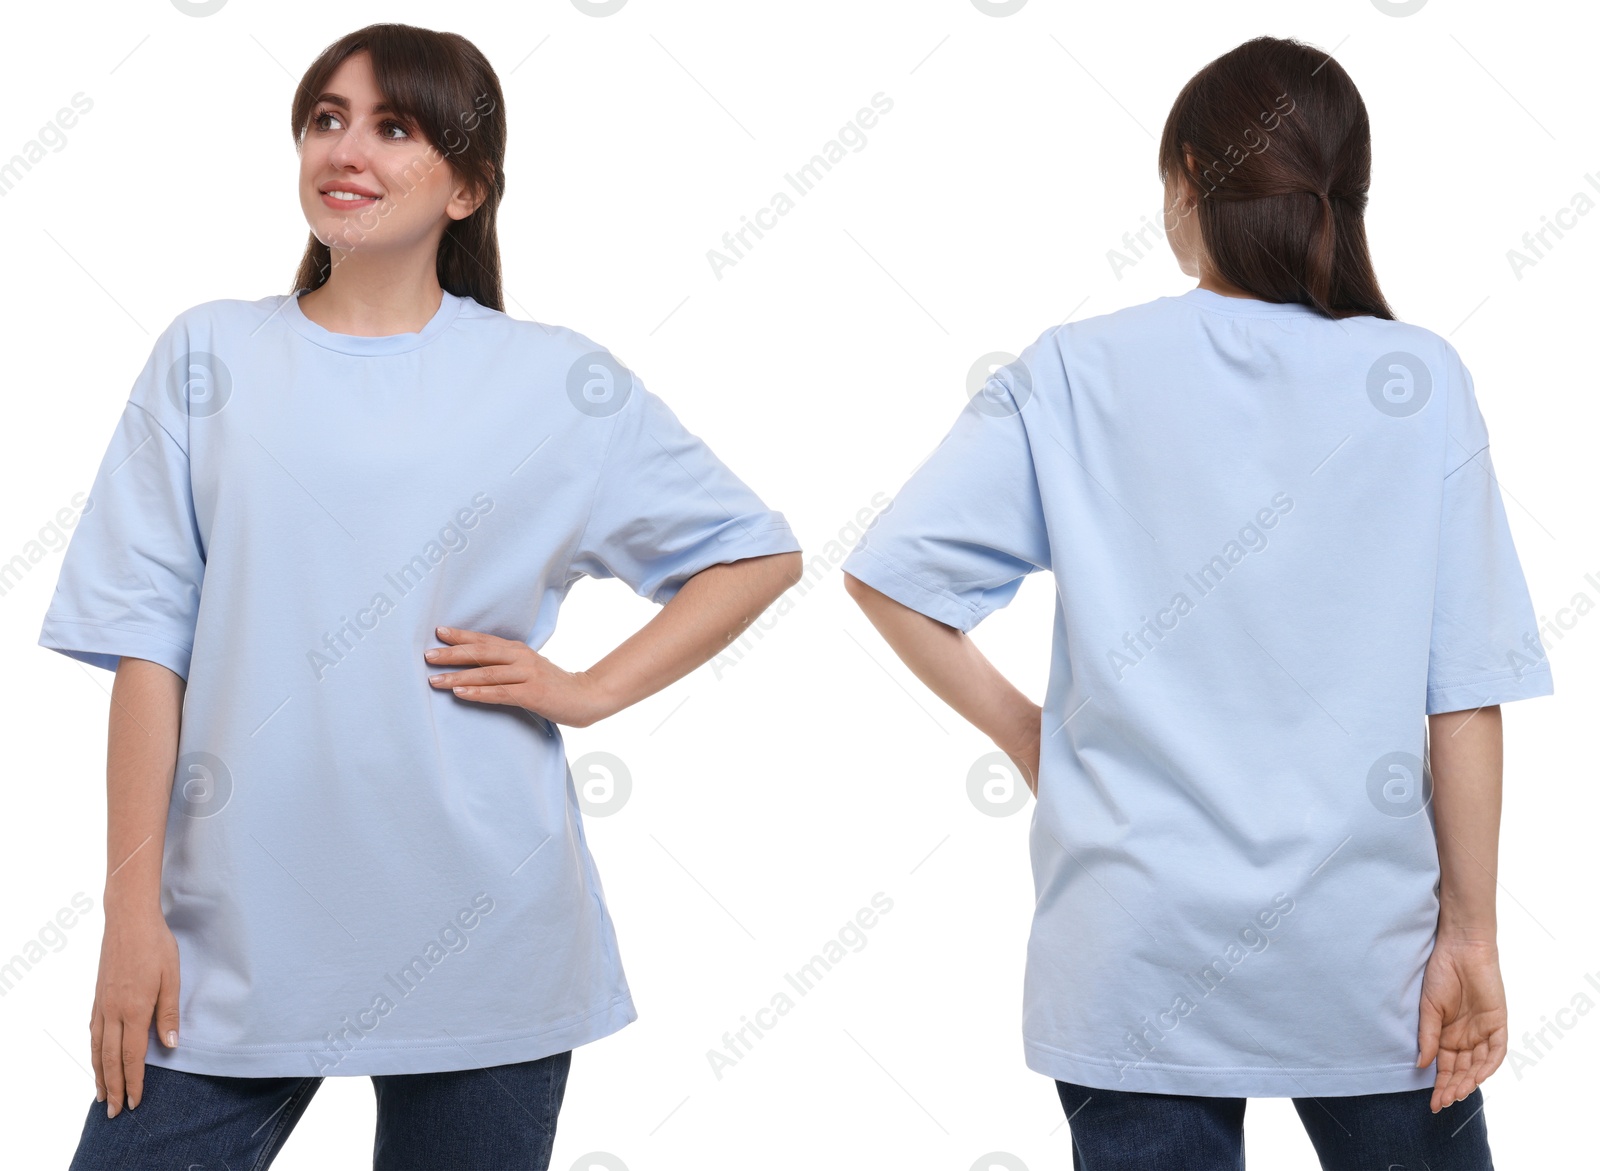 Image of Woman wearing light blue t-shirt on white background, collage of photos. Front and back views